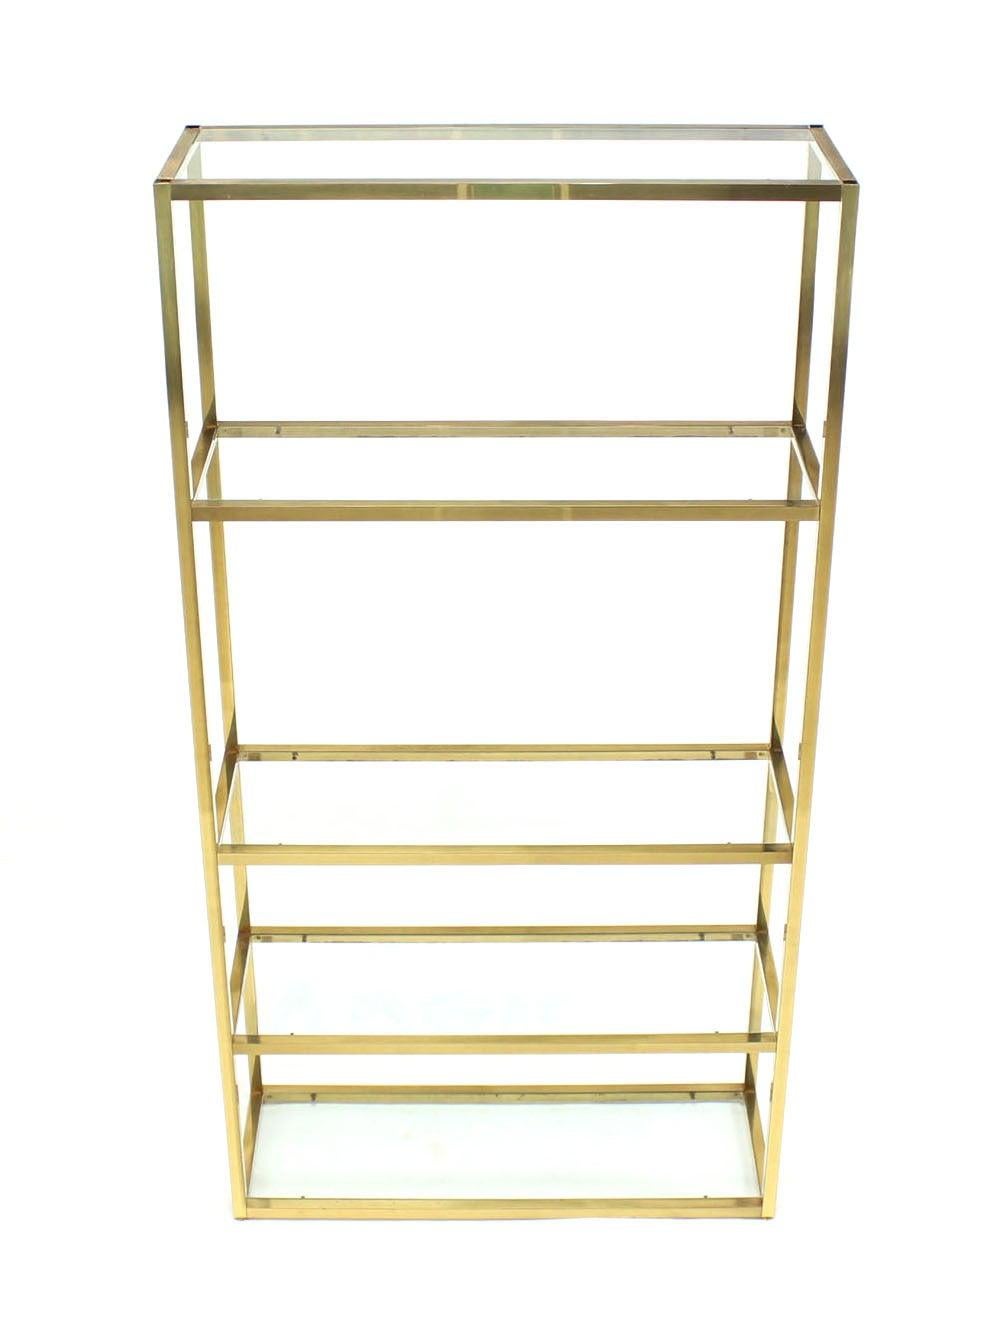 Solid Square Brass Tube Five Glass Shelves Etagere Display Fixture Vitrine
Very nice high quality craftsmanship solid brass etagere.